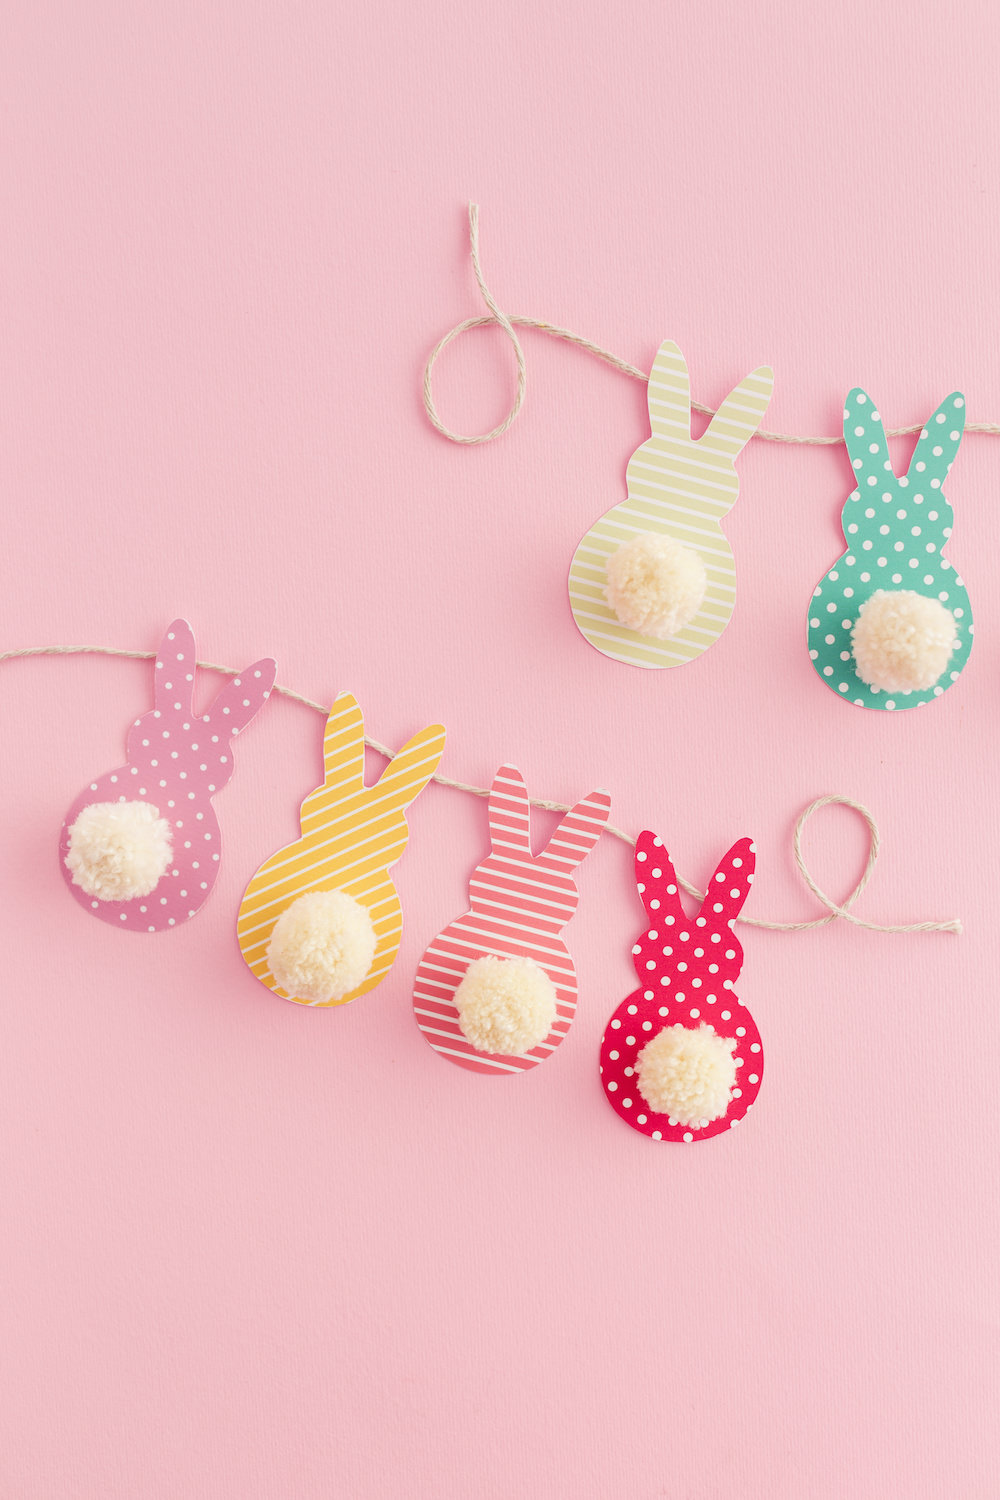 1001 + Ideas for Easter Crafts for Kids and Parents